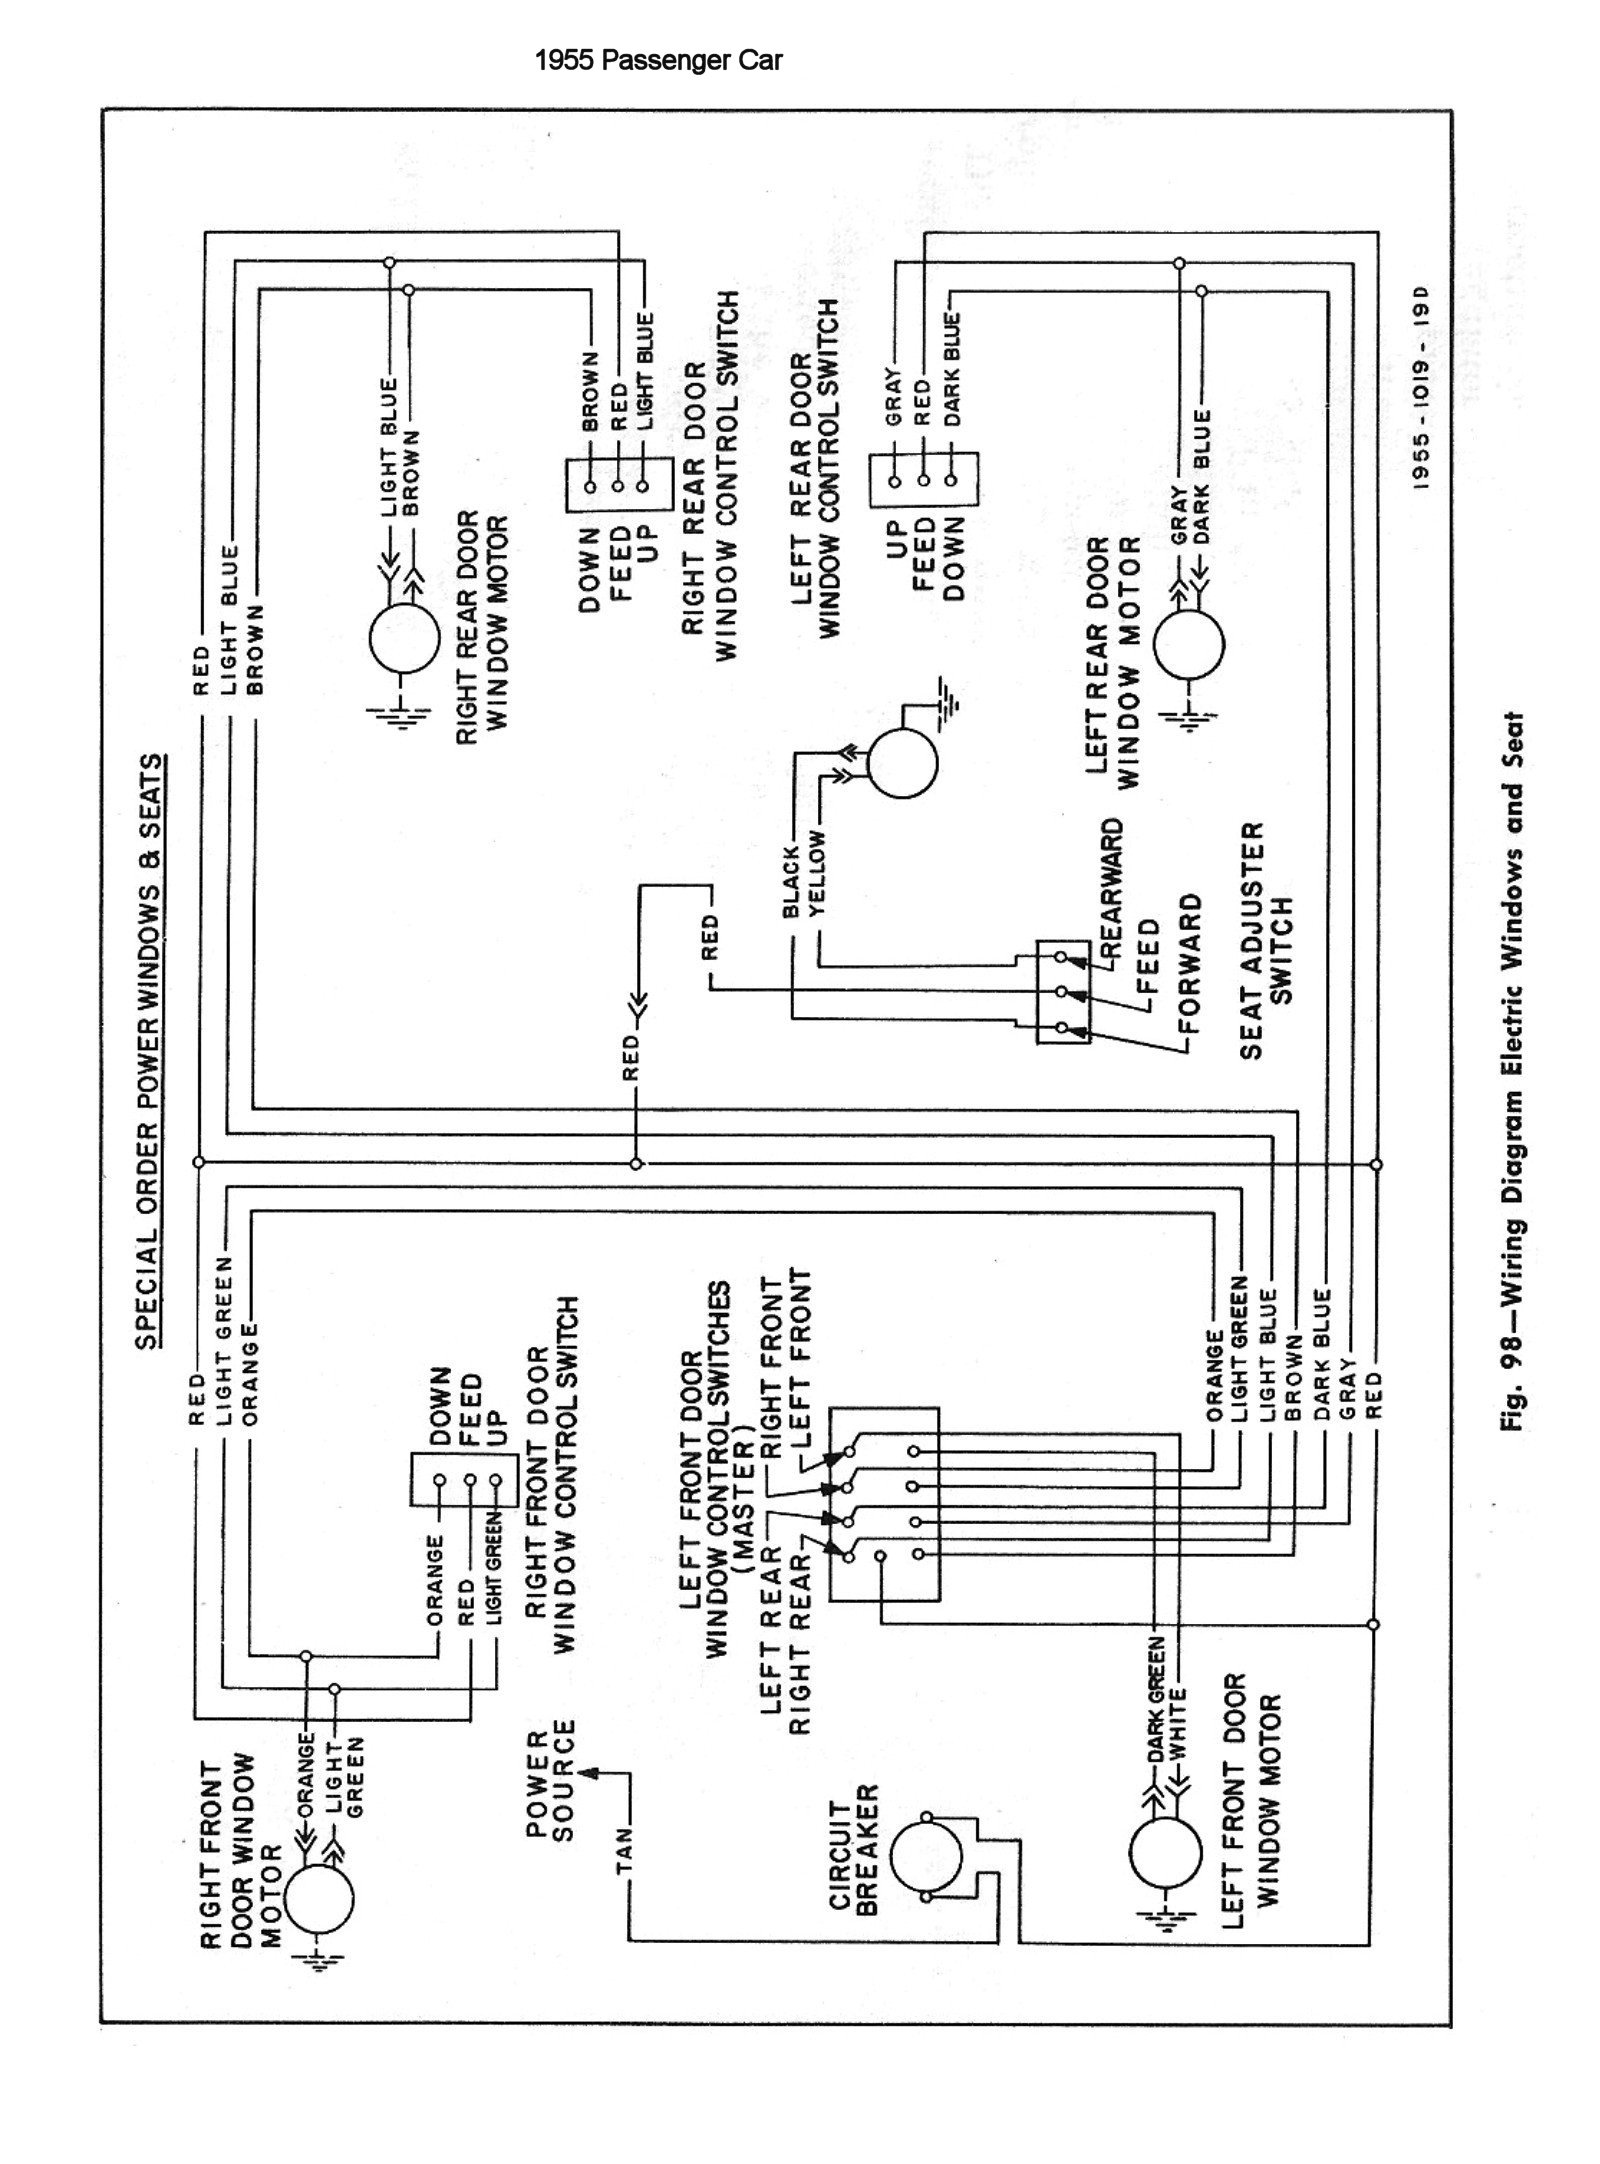 1985 Chevy Truck Power Window Wiring Diagram from chevy.oldcarmanualproject.com